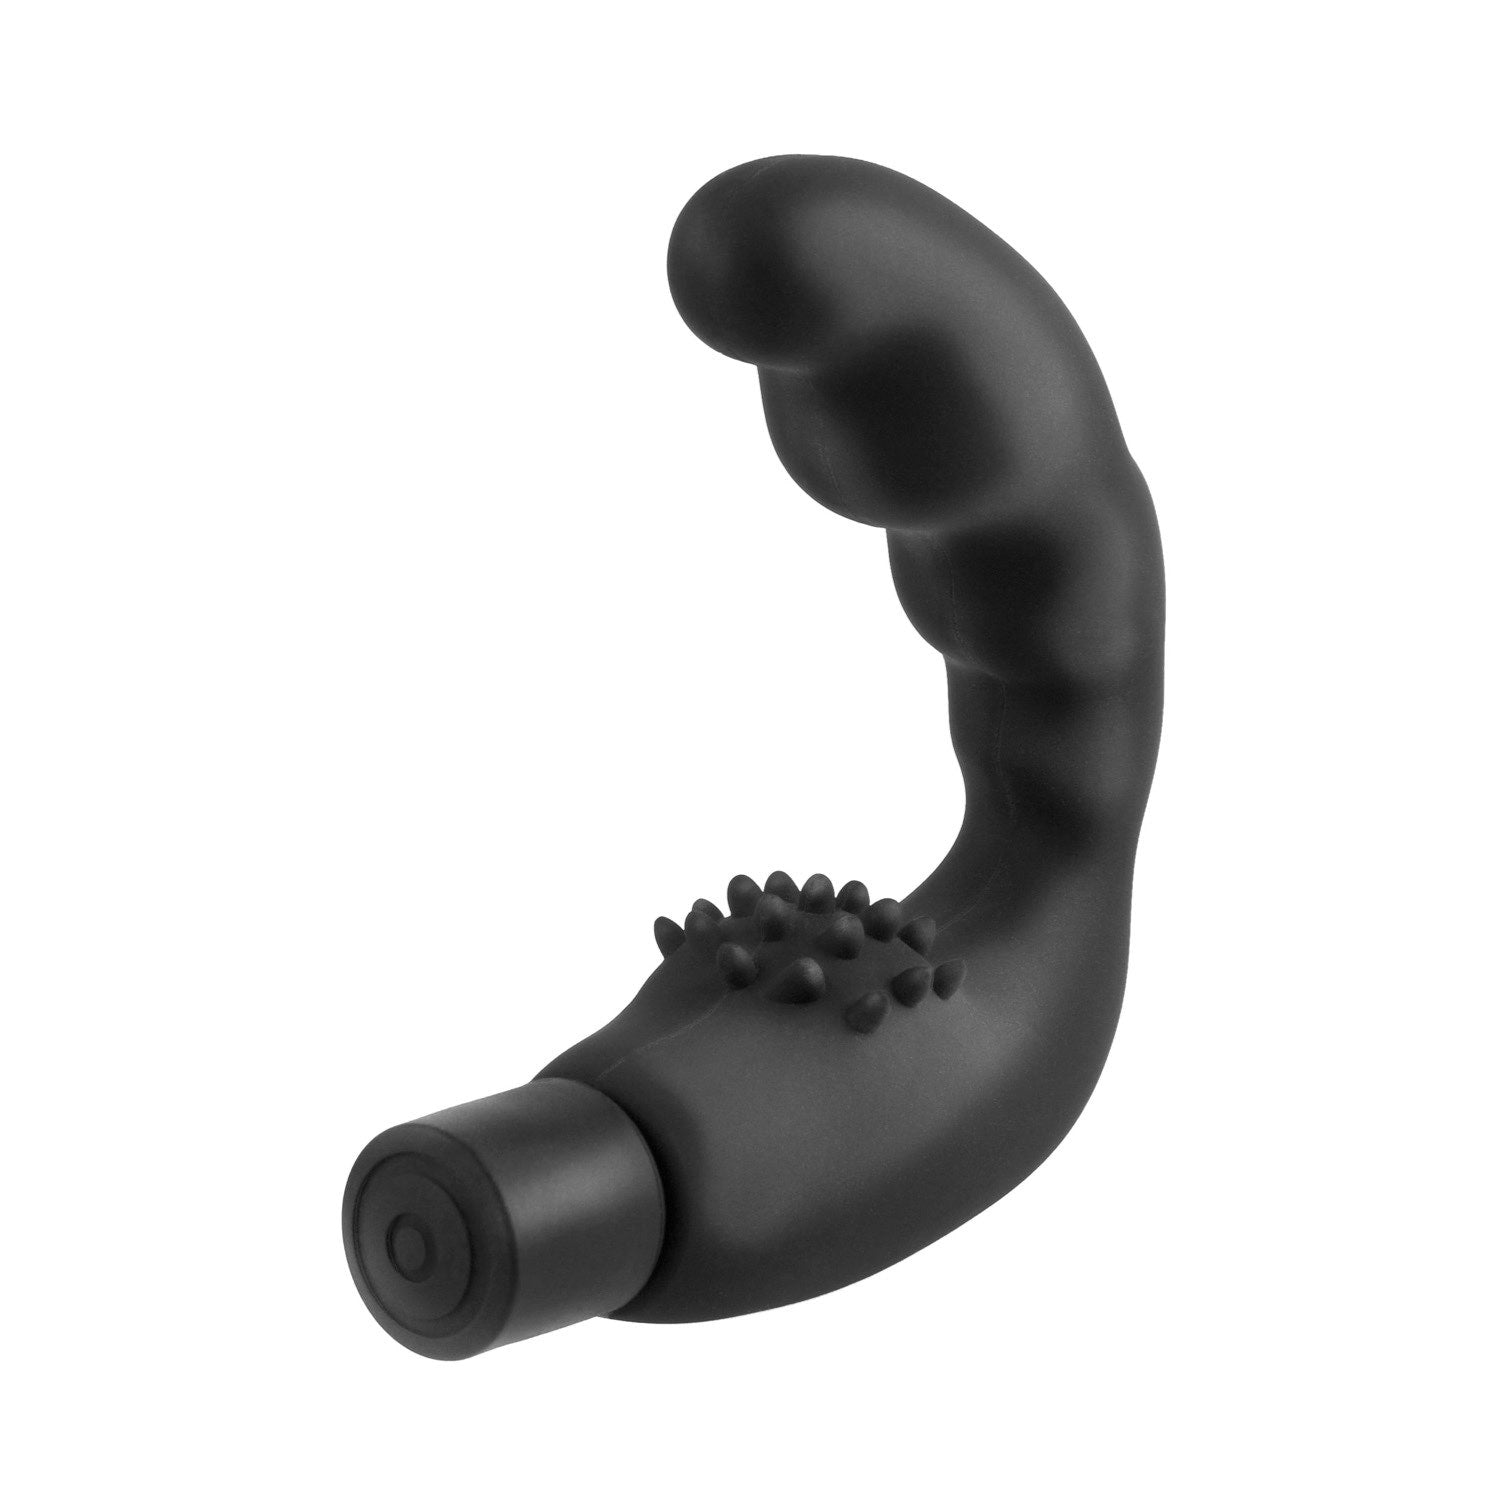 Anal Fantasy Collection Vibrating Reach Around - Black 10.75 cm (4.25&quot;) Vibrating Prostate Wand by Pipedream